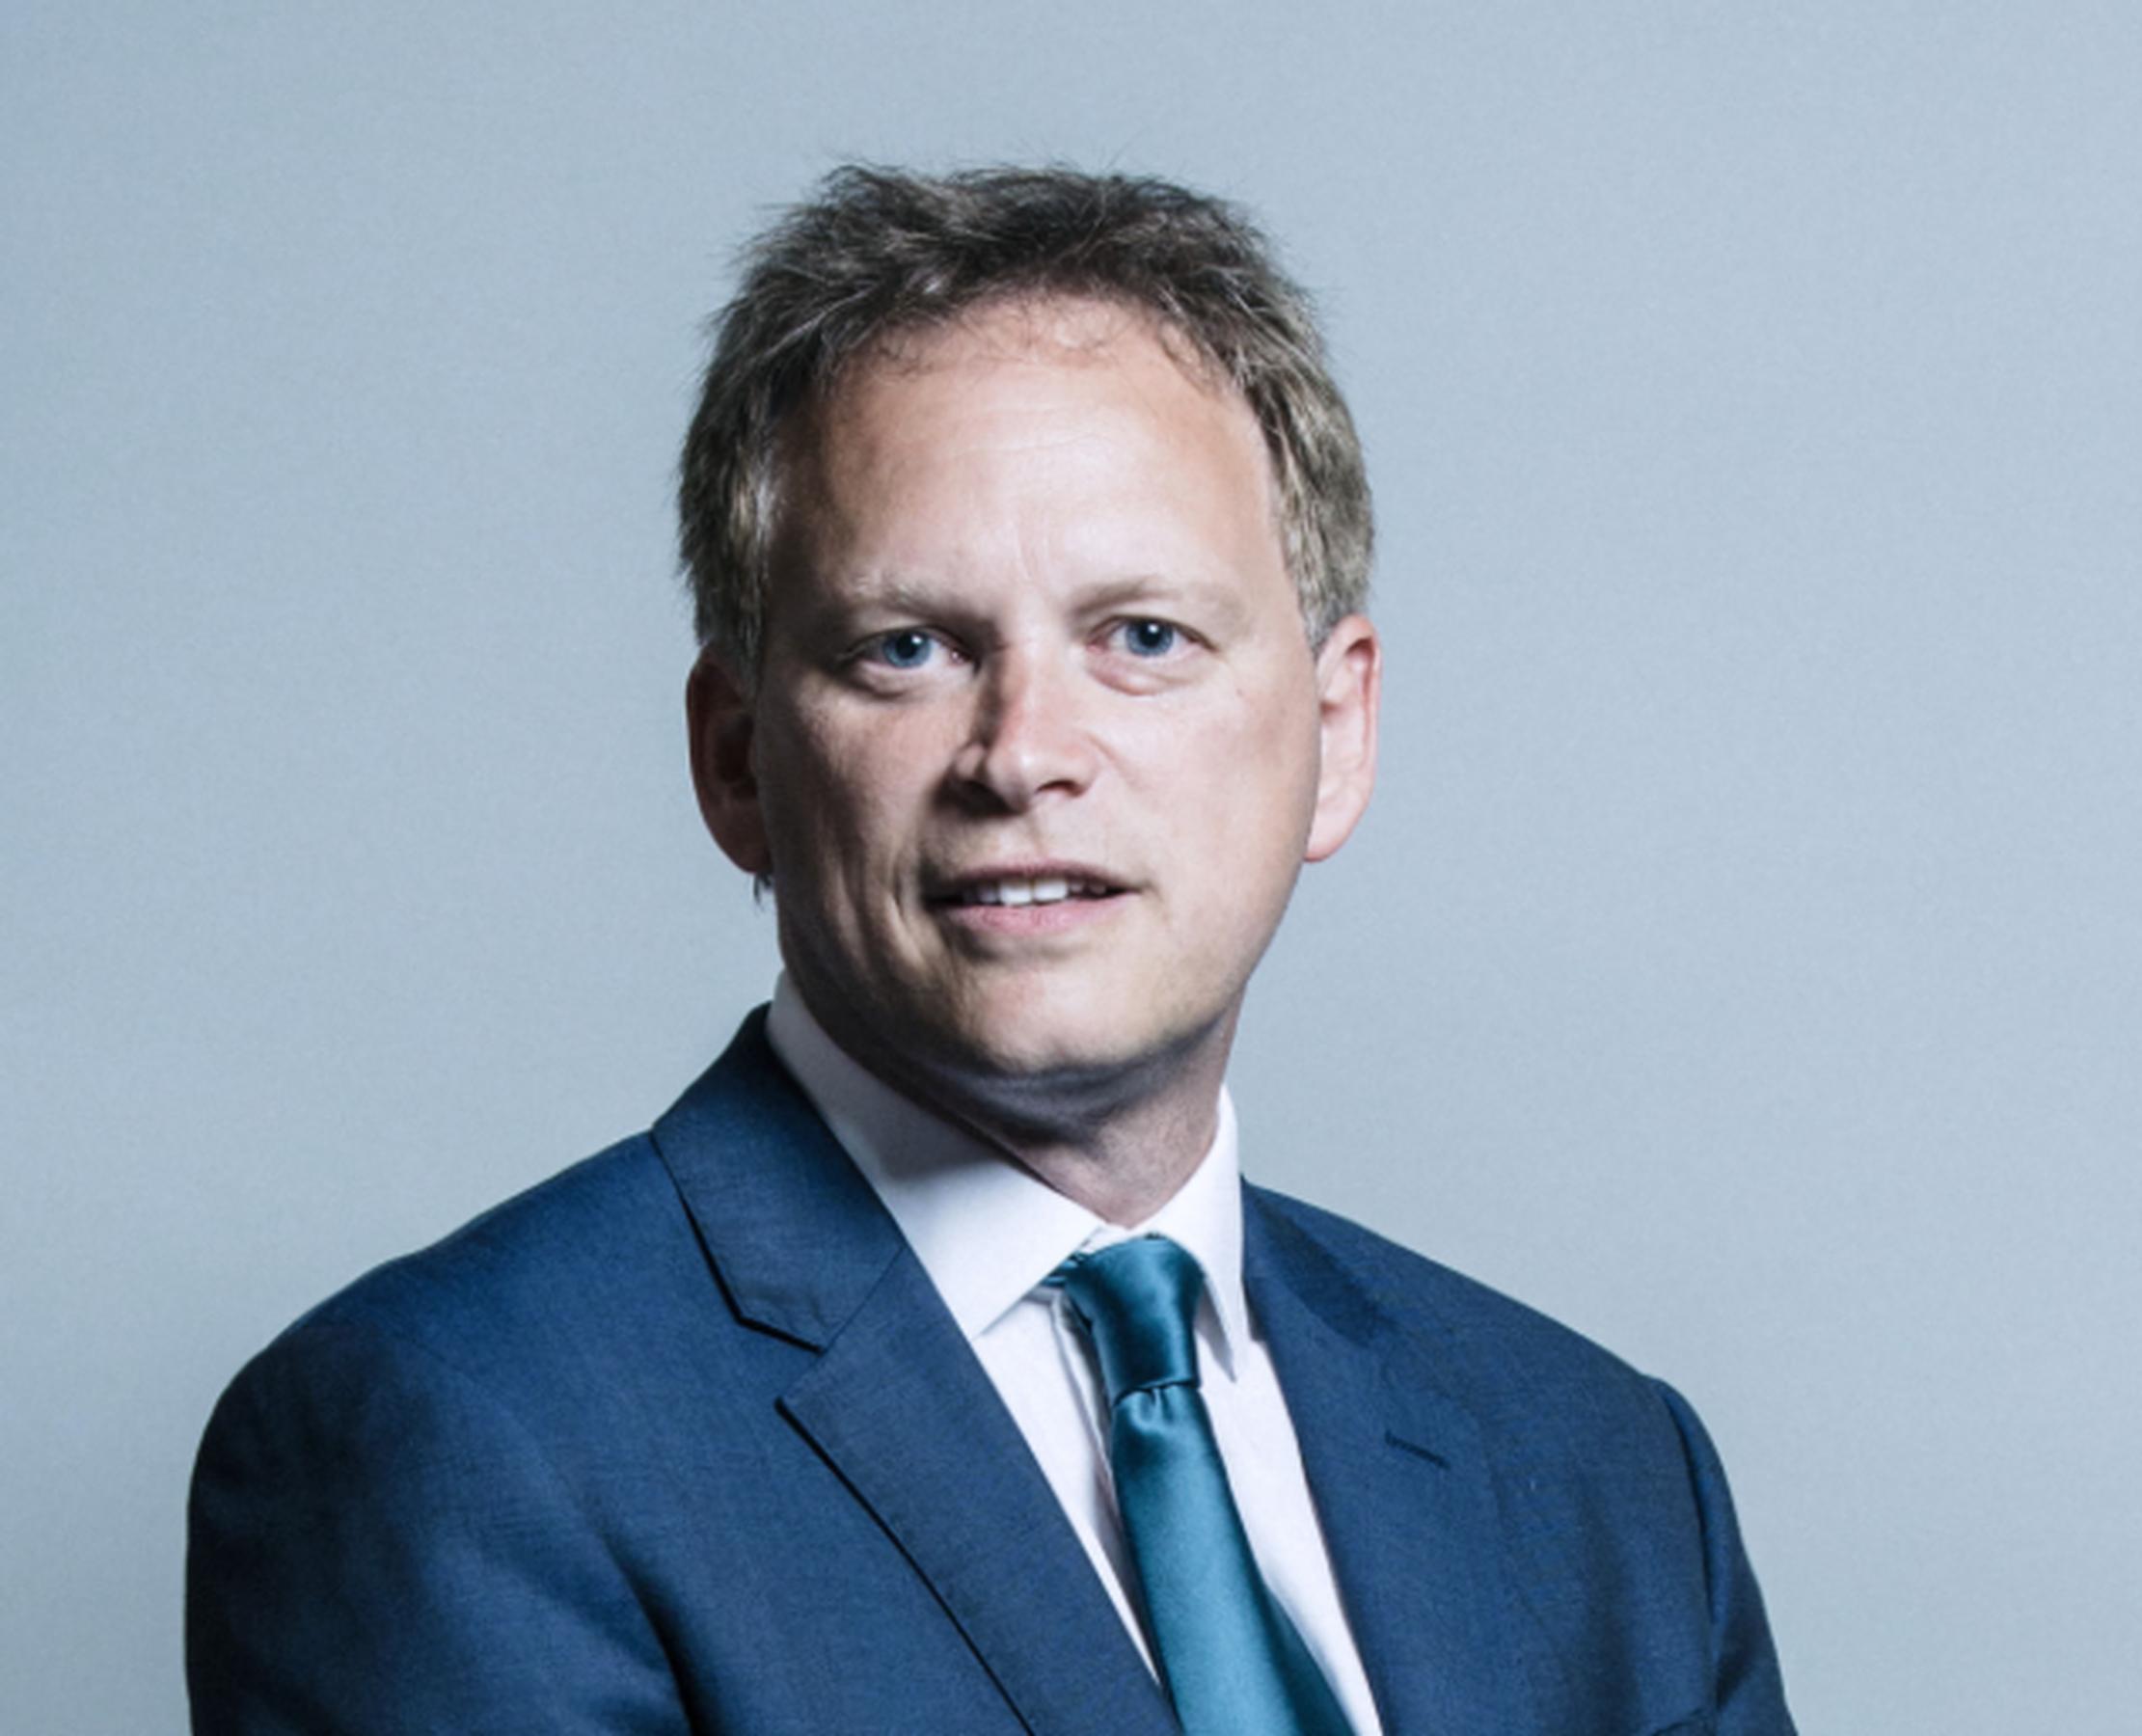 Grant Shapps MP